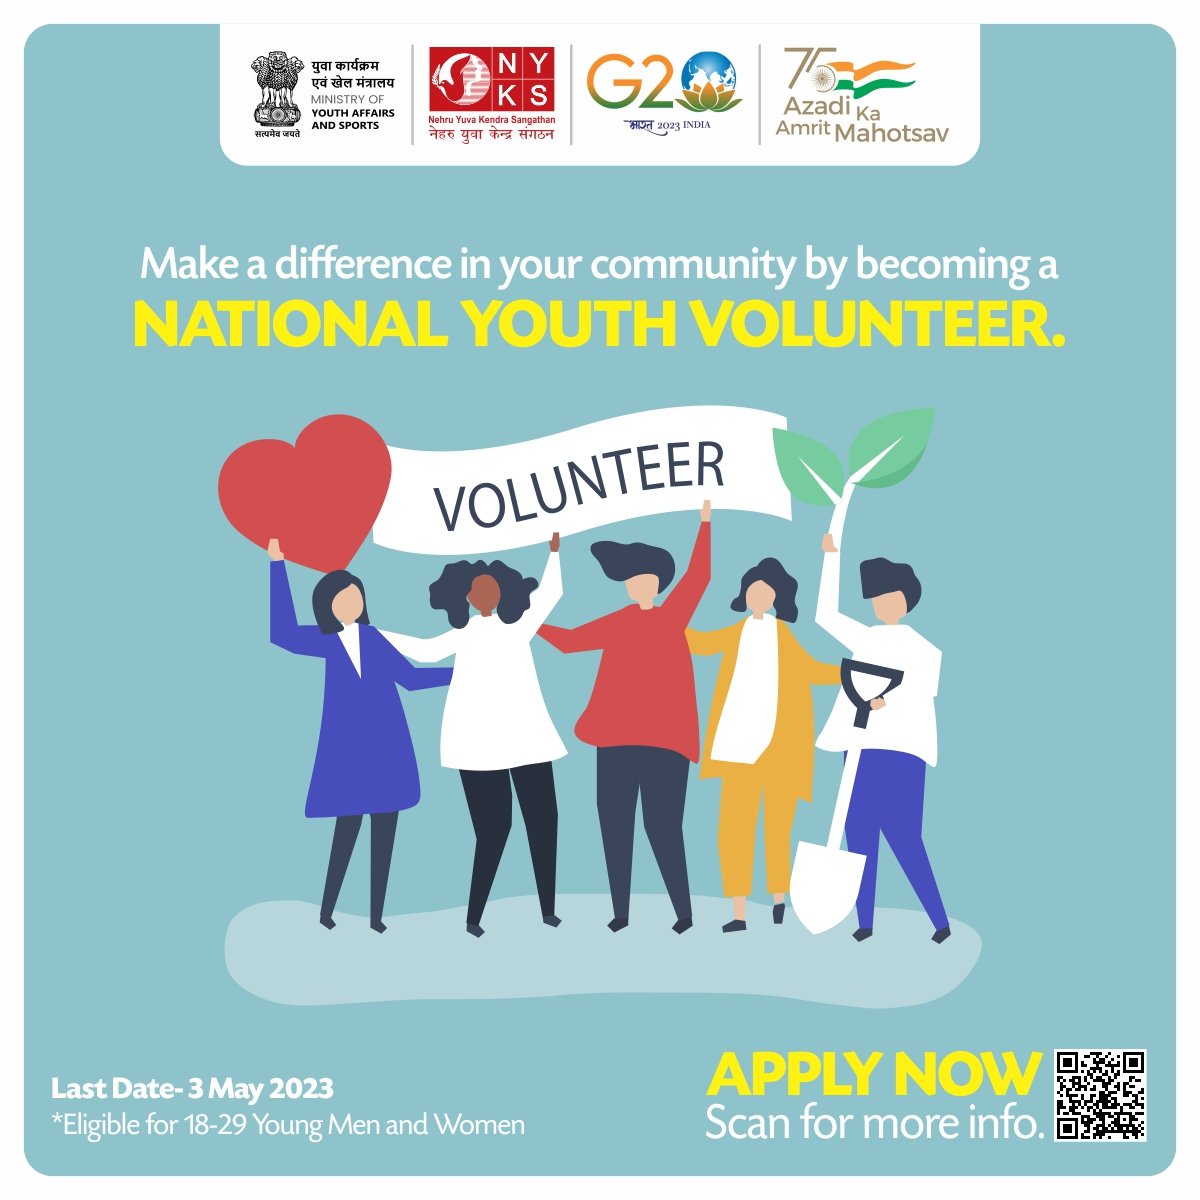 Become a National Youth Volunteer and make a difference. 
Eligible for 18-29 Young Men and Women. 
For more information connect with your nearest NYK district offices or Scan the QR code.  
Visit: nyks.nic.in

#NYV #YouthVolunteer #NyksIndia #Youth #India